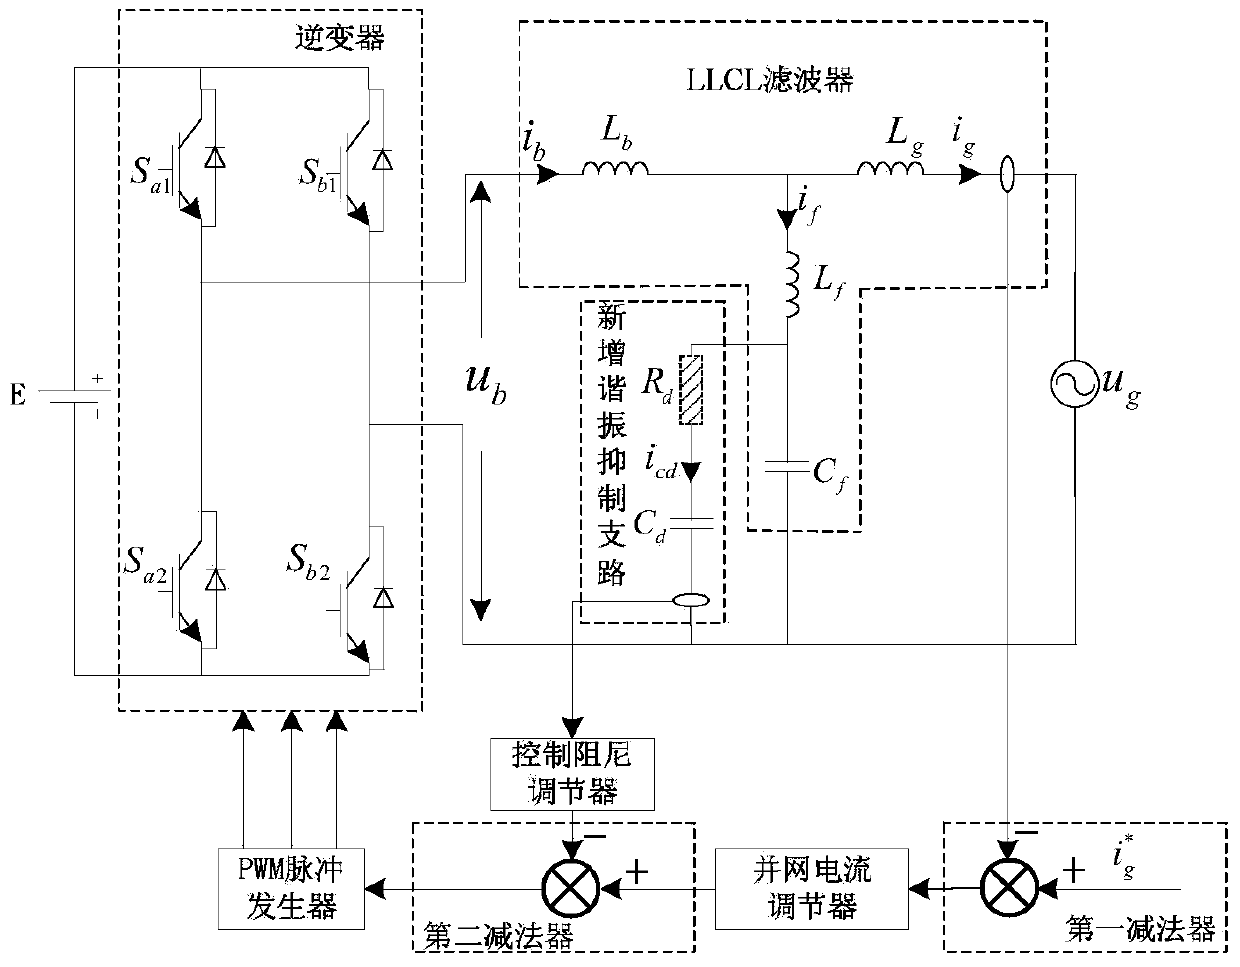 Control damping method applied to the resonance inhibition of LLCL single-phase grid connected inverter